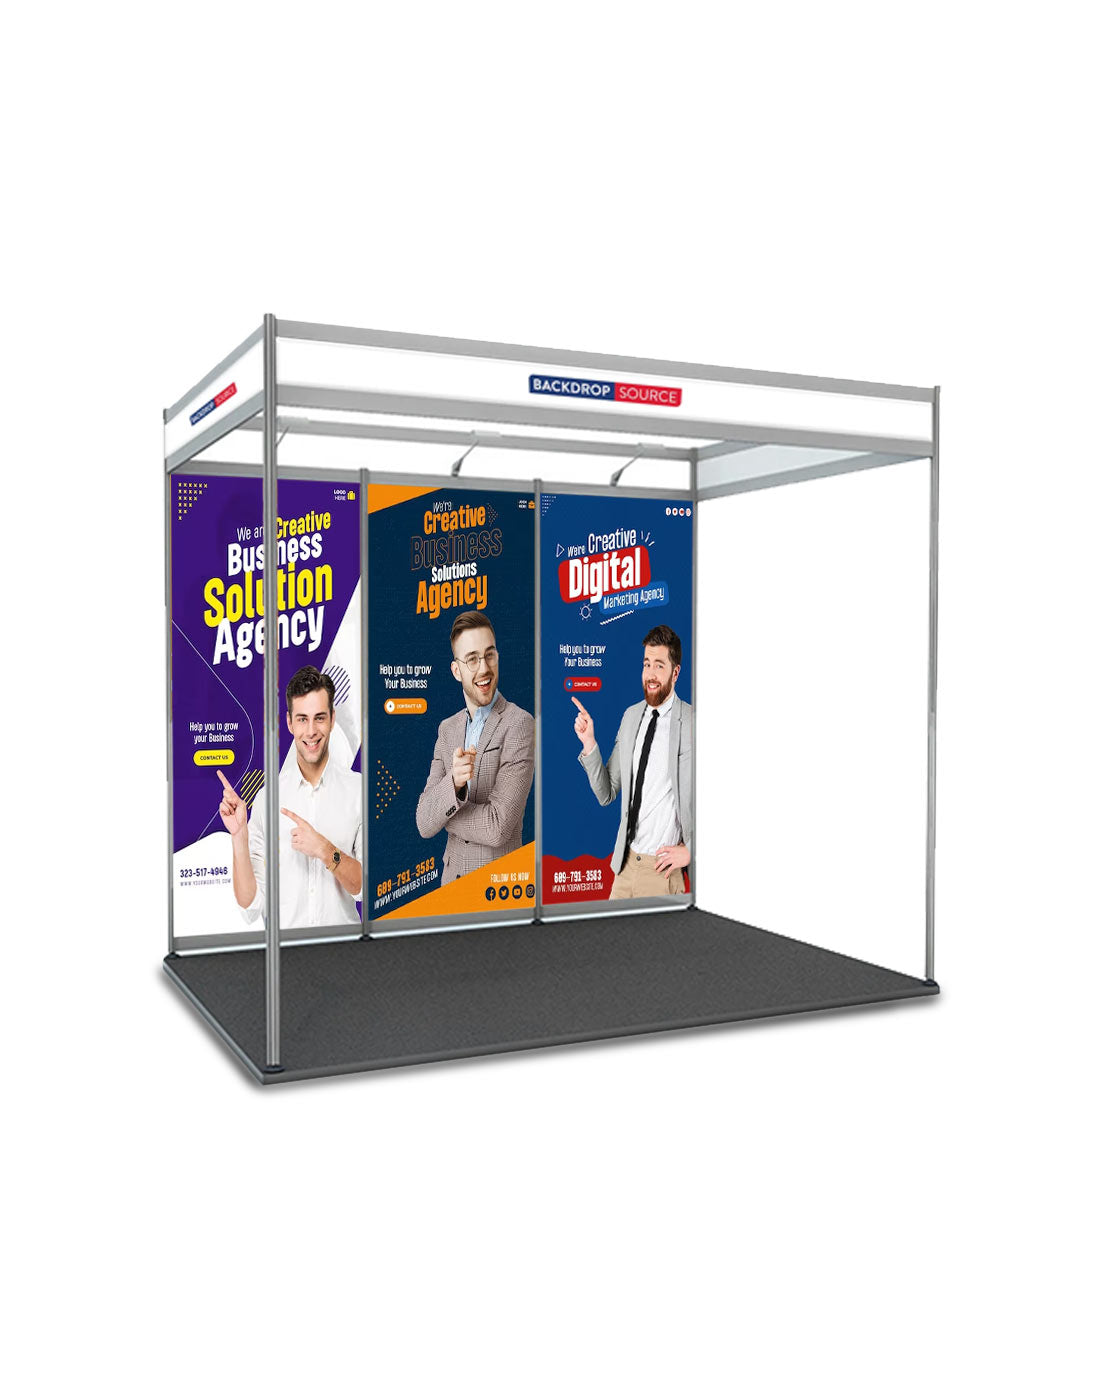 Shell Scheme Exhibition Graphics for 10ft Wide x 6.5ft Depth Booth - Backdropsource